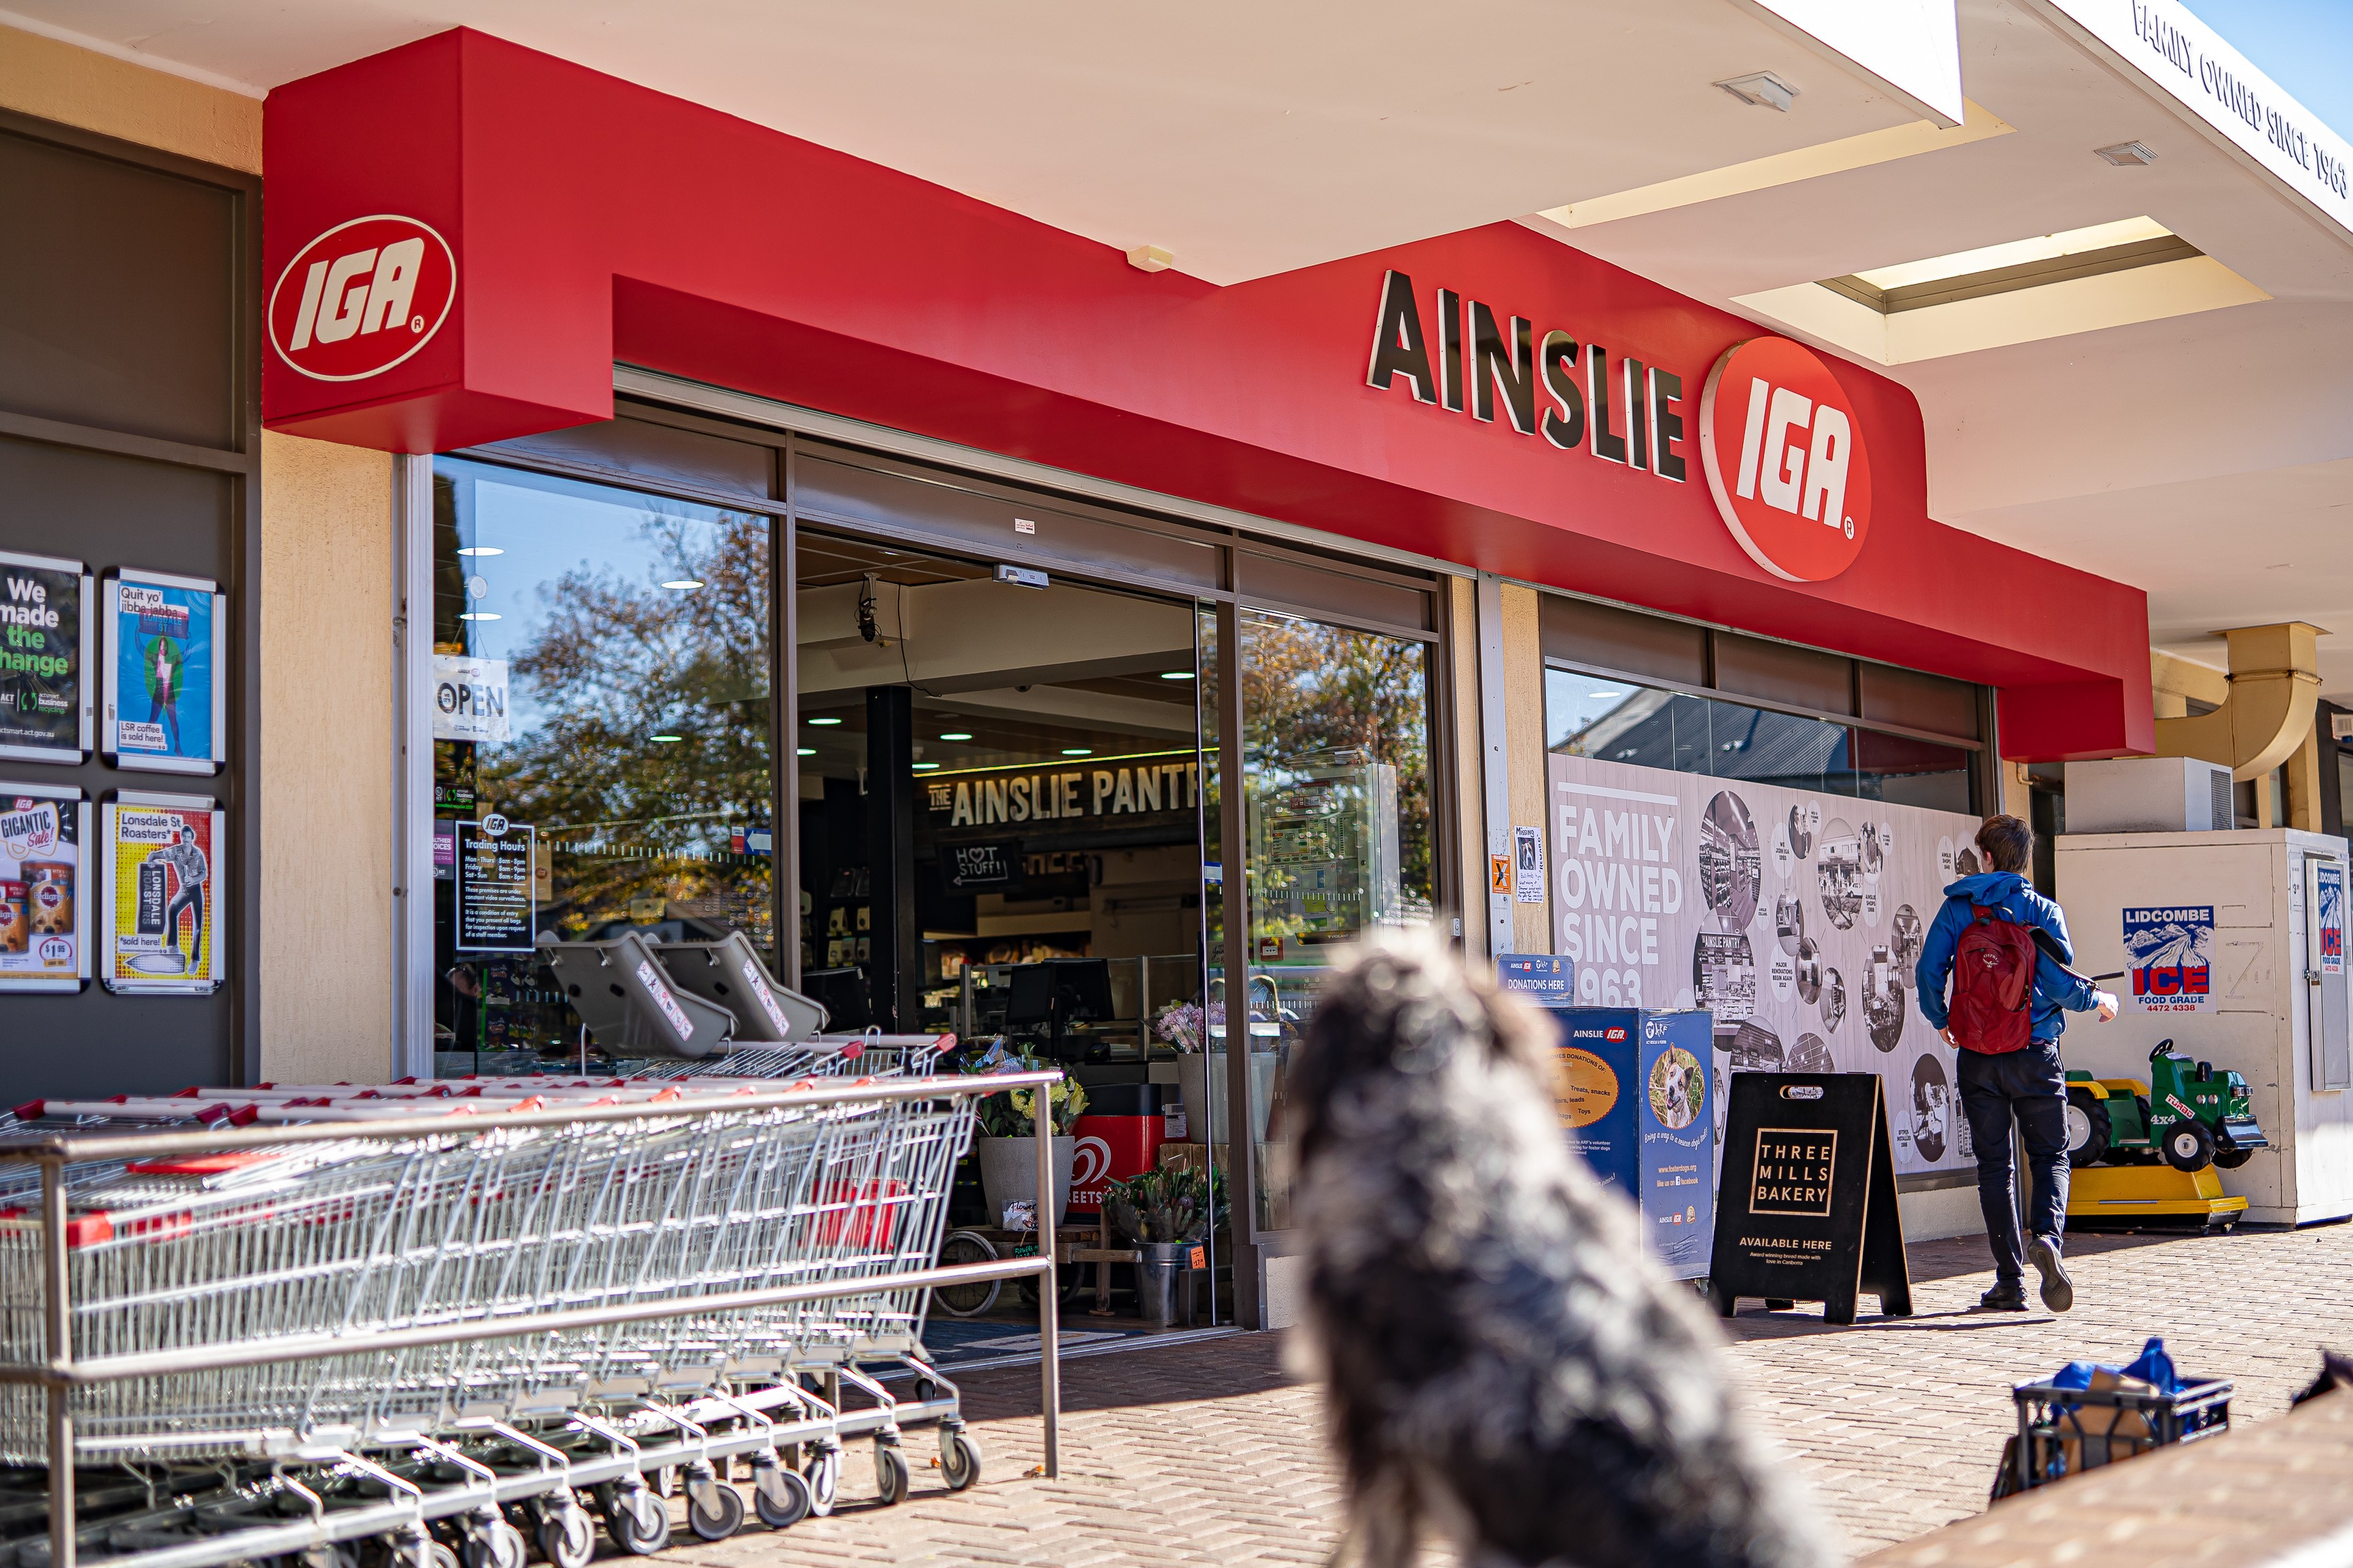 In 20 years of fruit and vege, this Ainslie IGA grocer hasn't seen prices so high for so long